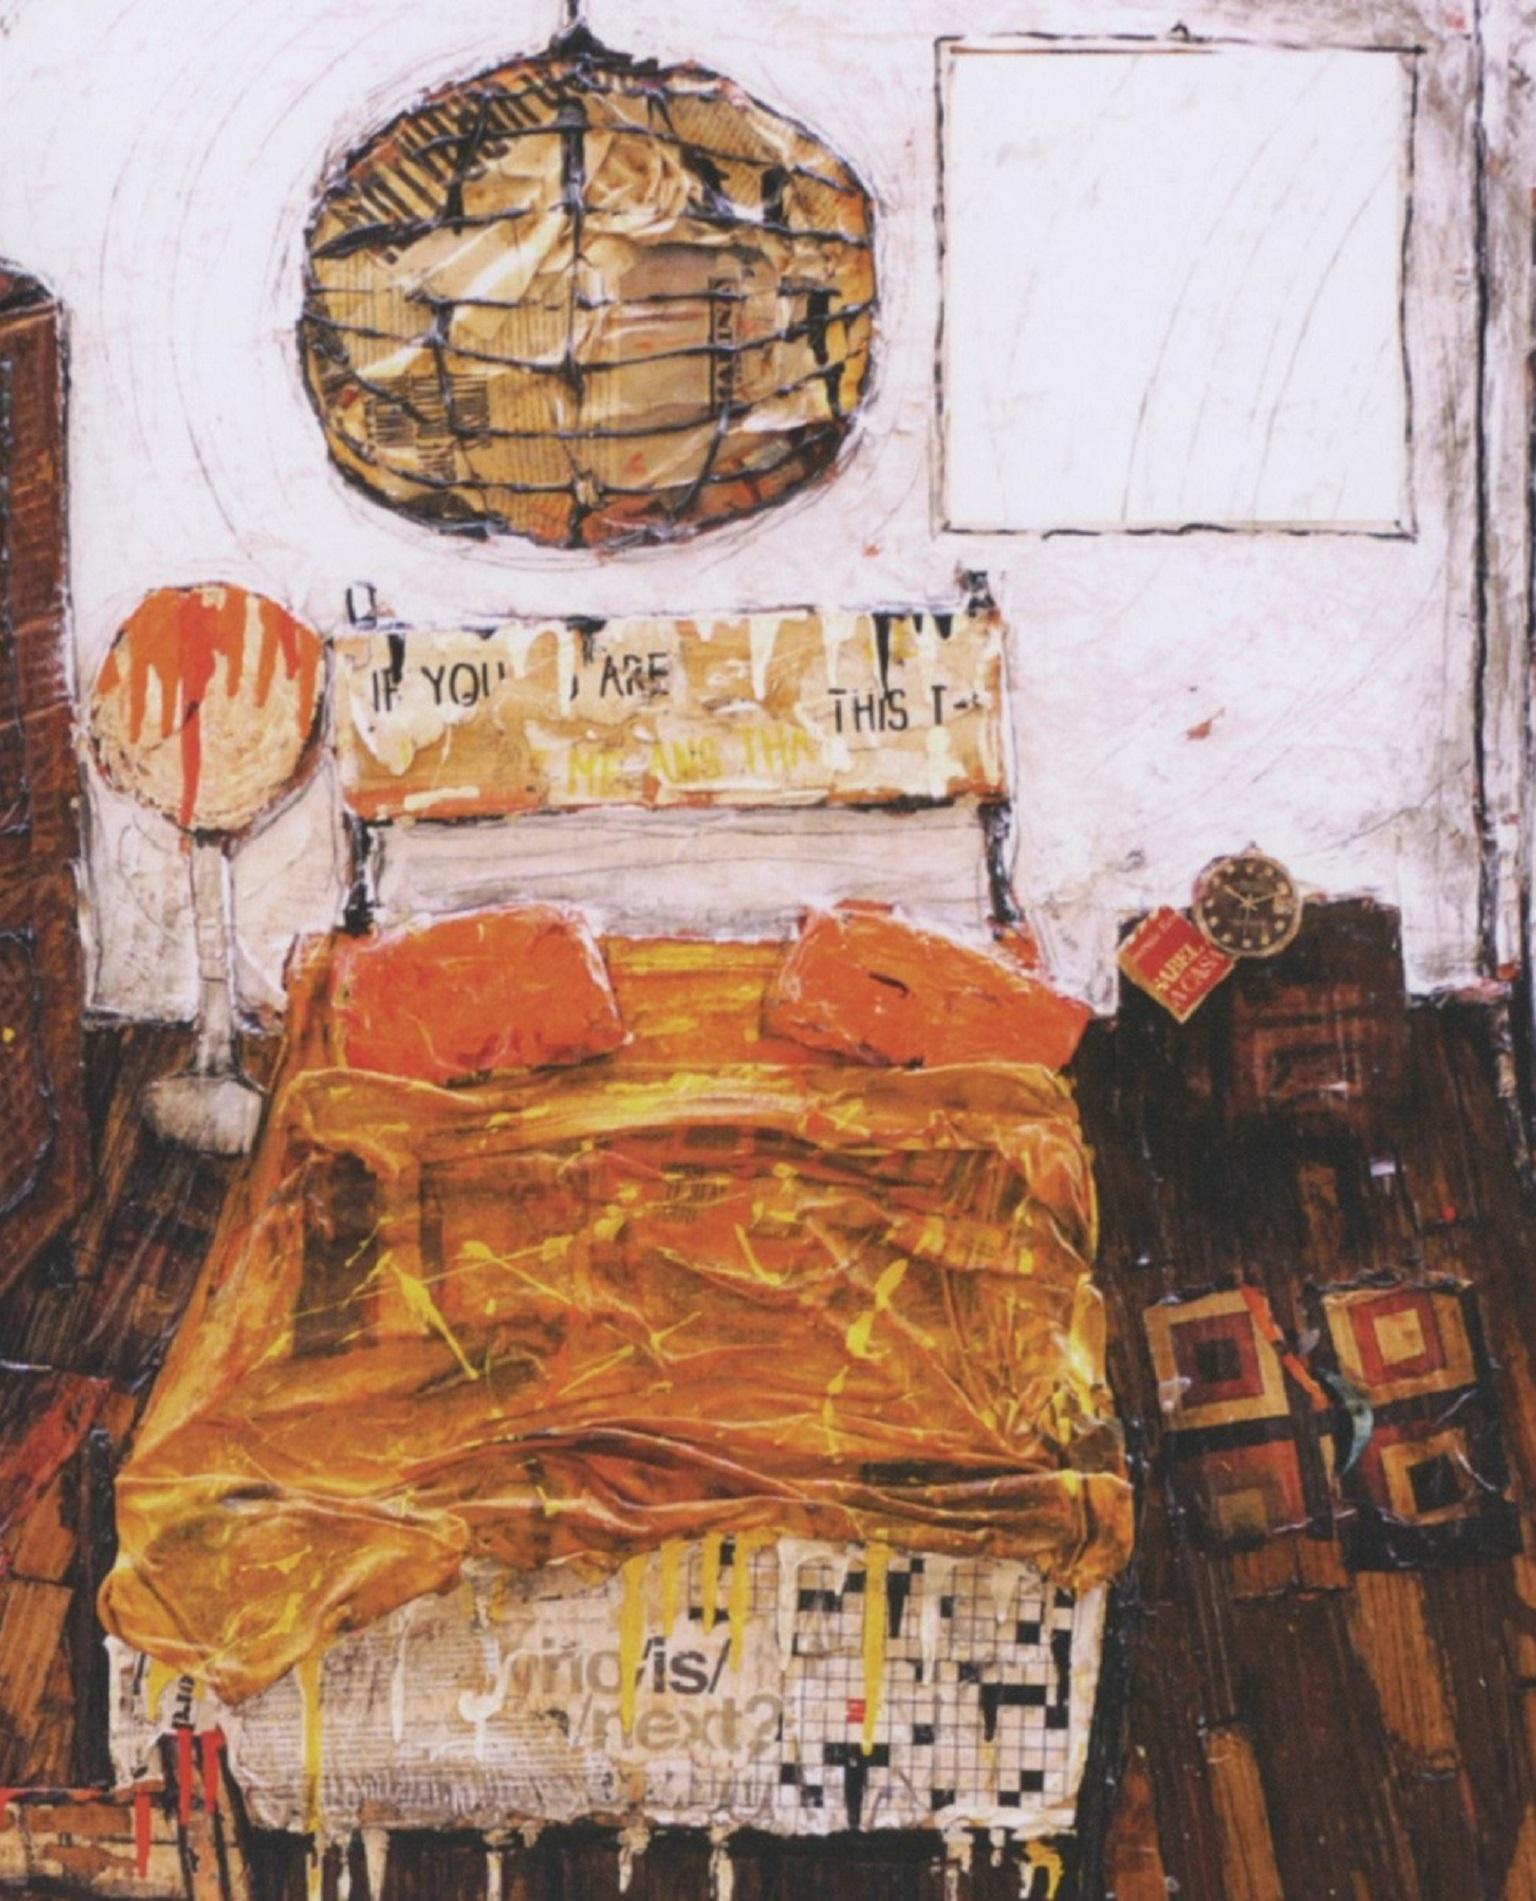 My bedroom
116 x 107 cm
Collage on cardboard, Acrylic and varnish paint

First of all it is Chaos 